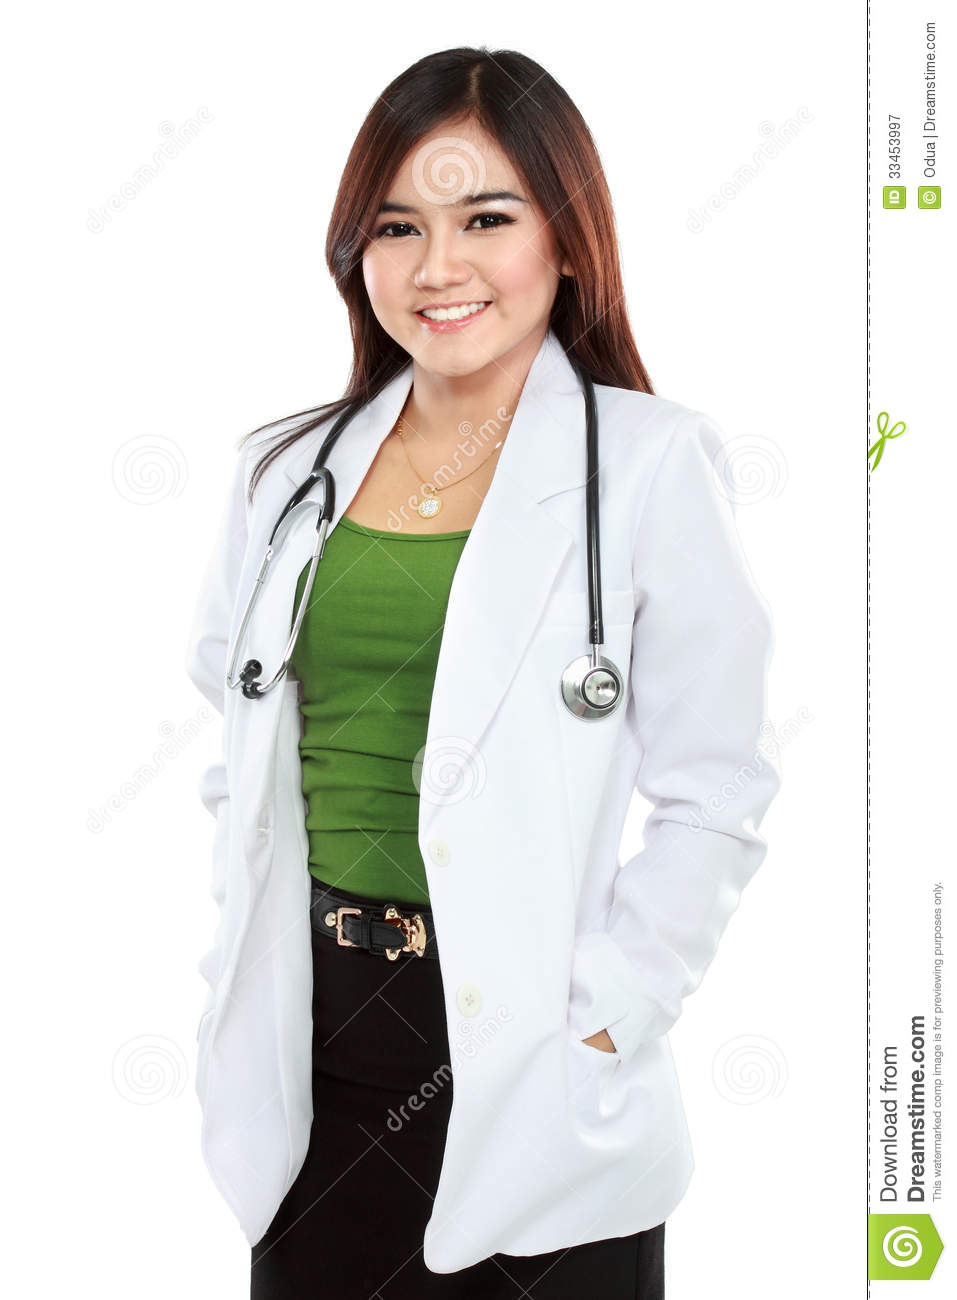 Portrait Of A Female Doctor In Lab Coat With Stethoscope Isolated Over